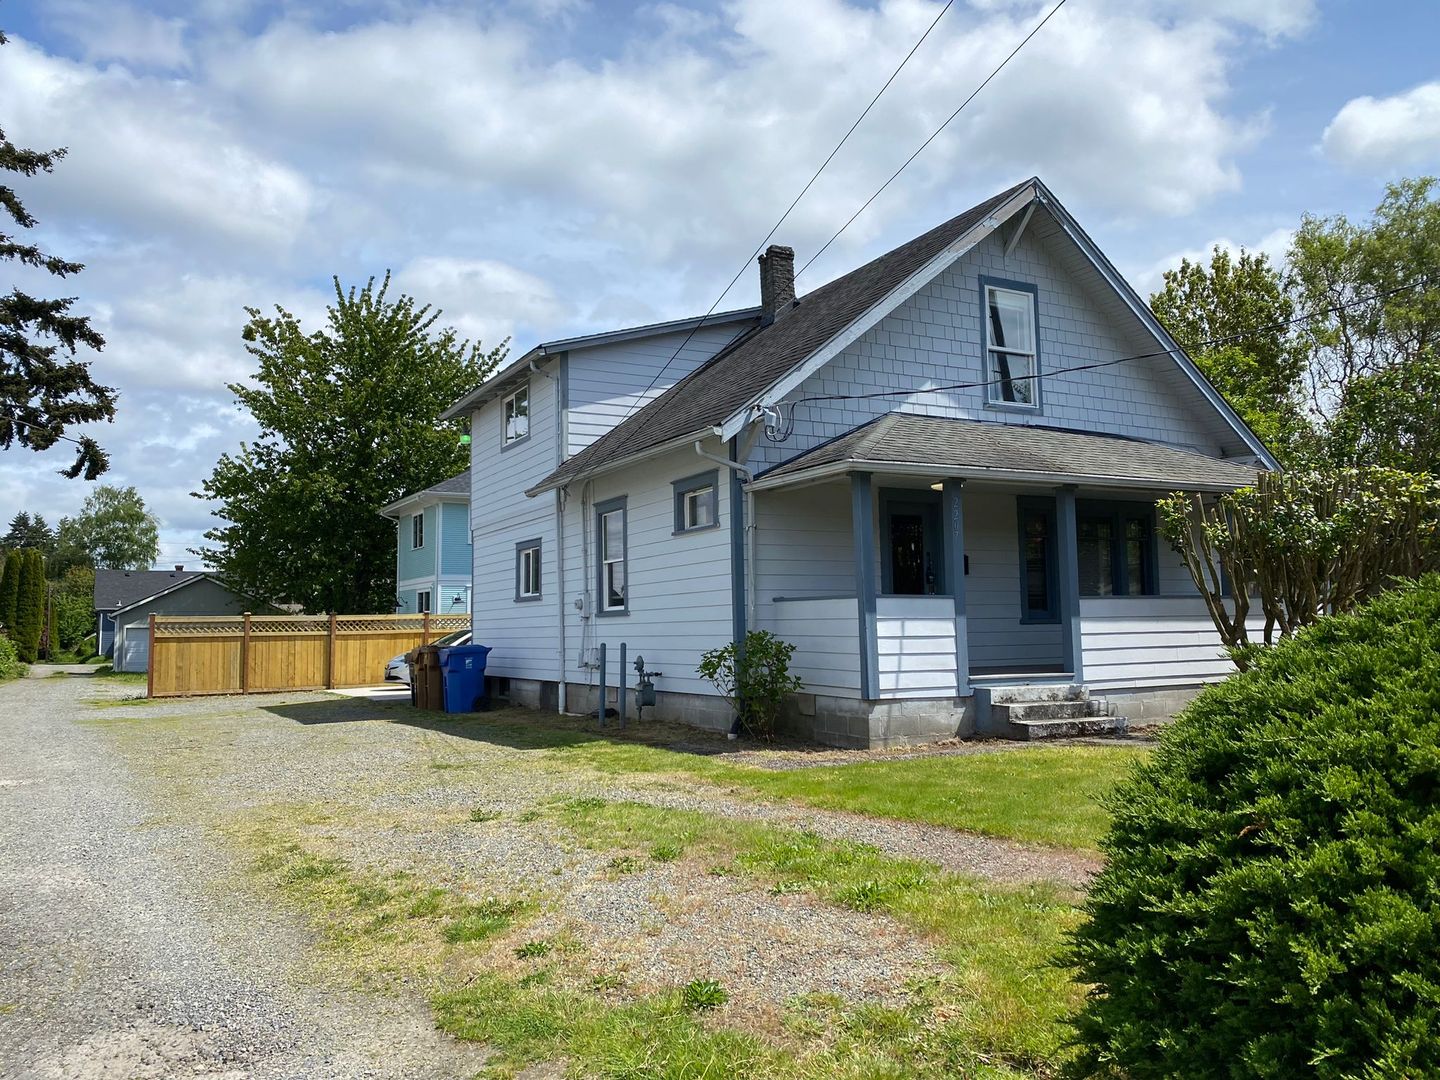 Beautiful house in Tacoma with new granite countertops and hardwood flooring!